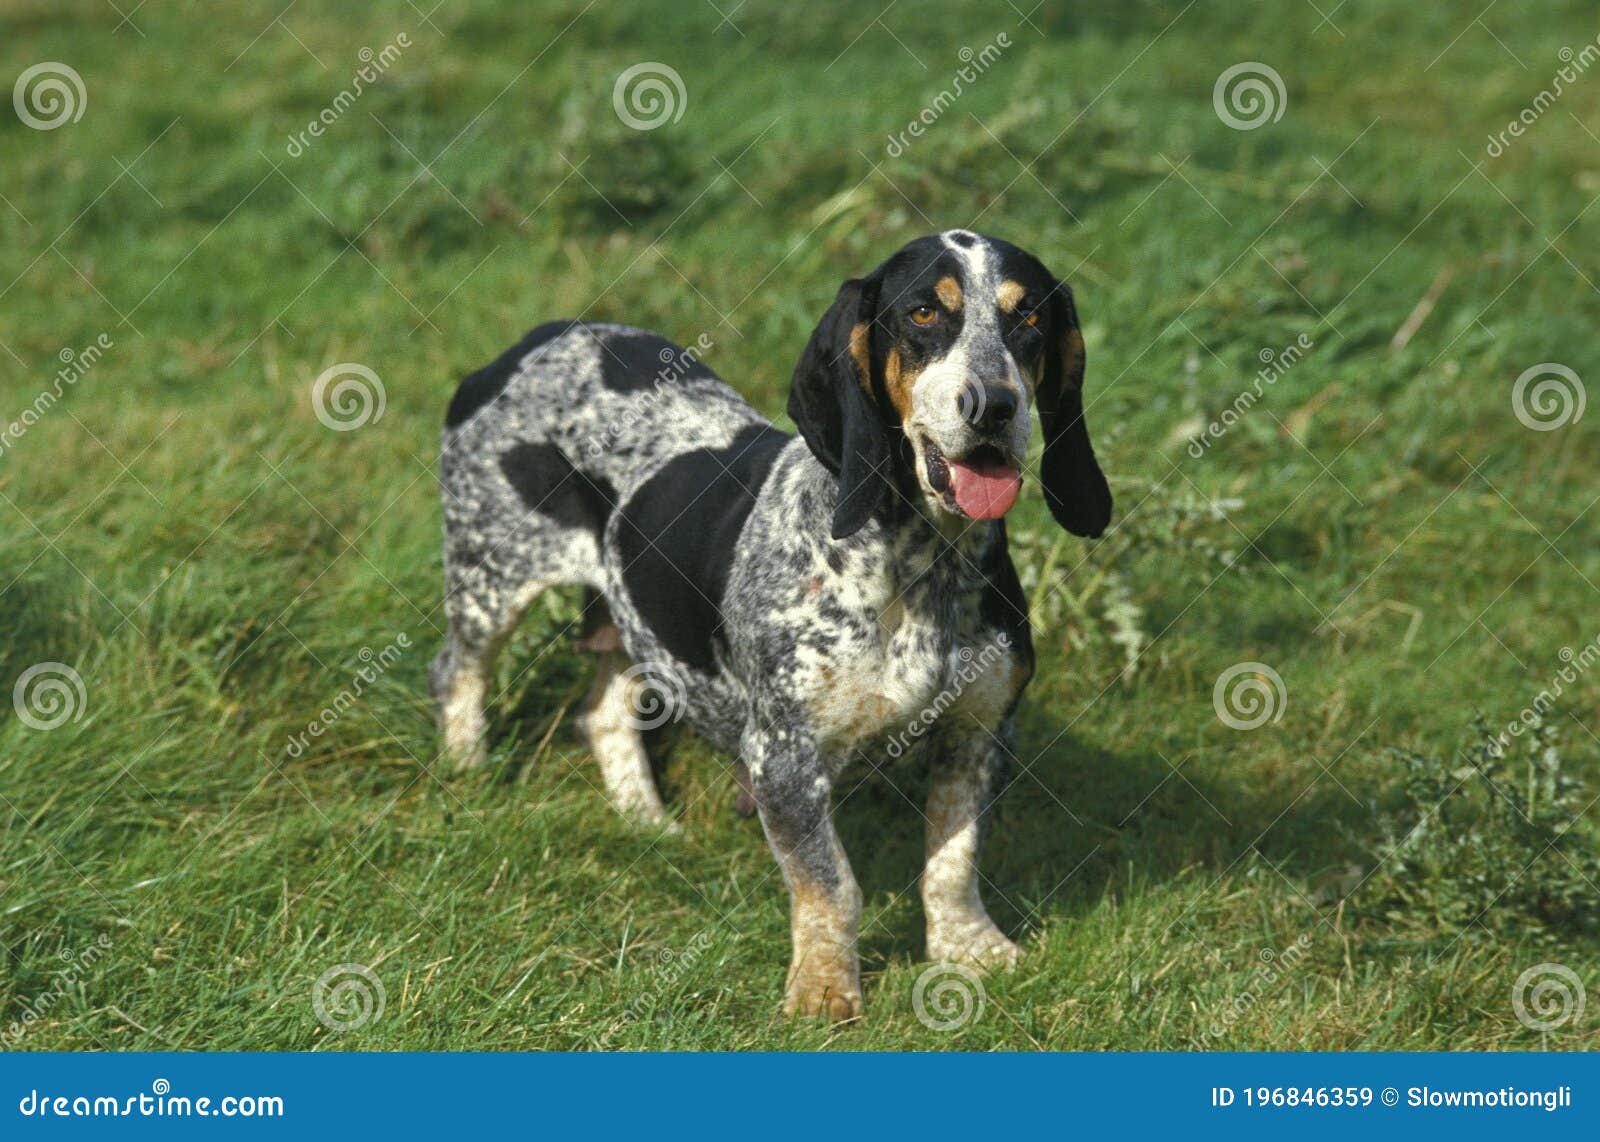 49 Gascogne Dog Photos Free Royalty Free Stock Photos From Dreamstime